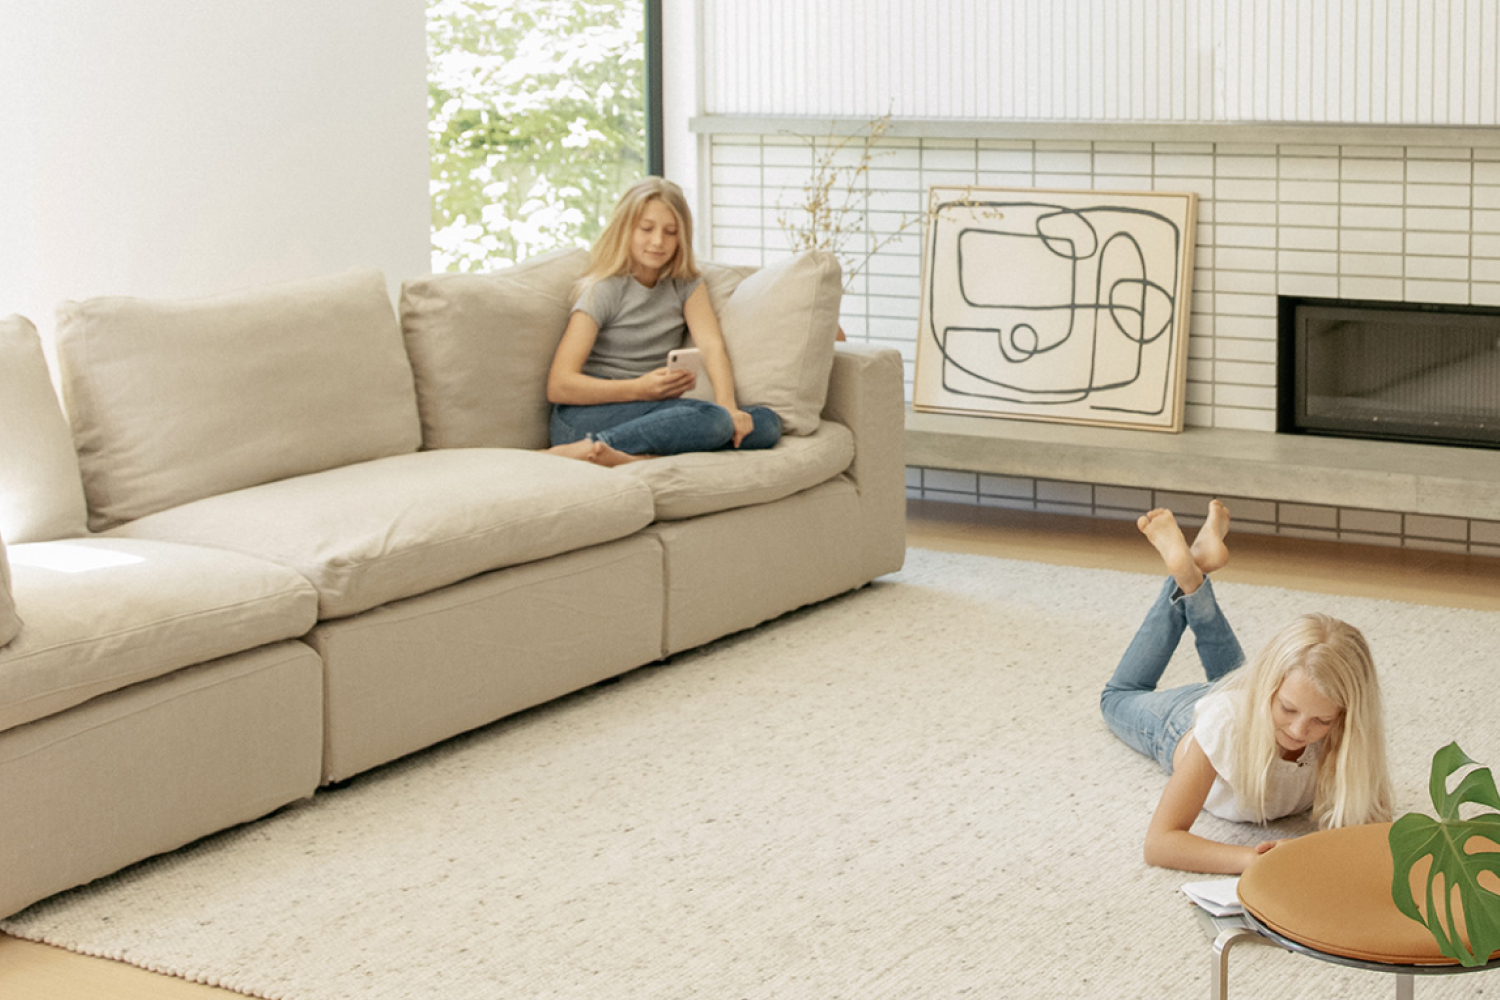 A comfortable and modern living room scene with two girls. One is sitting on a large beige EM Sky Sofa, focused on her smartphone, and the other is lying on the floor, reading a book.